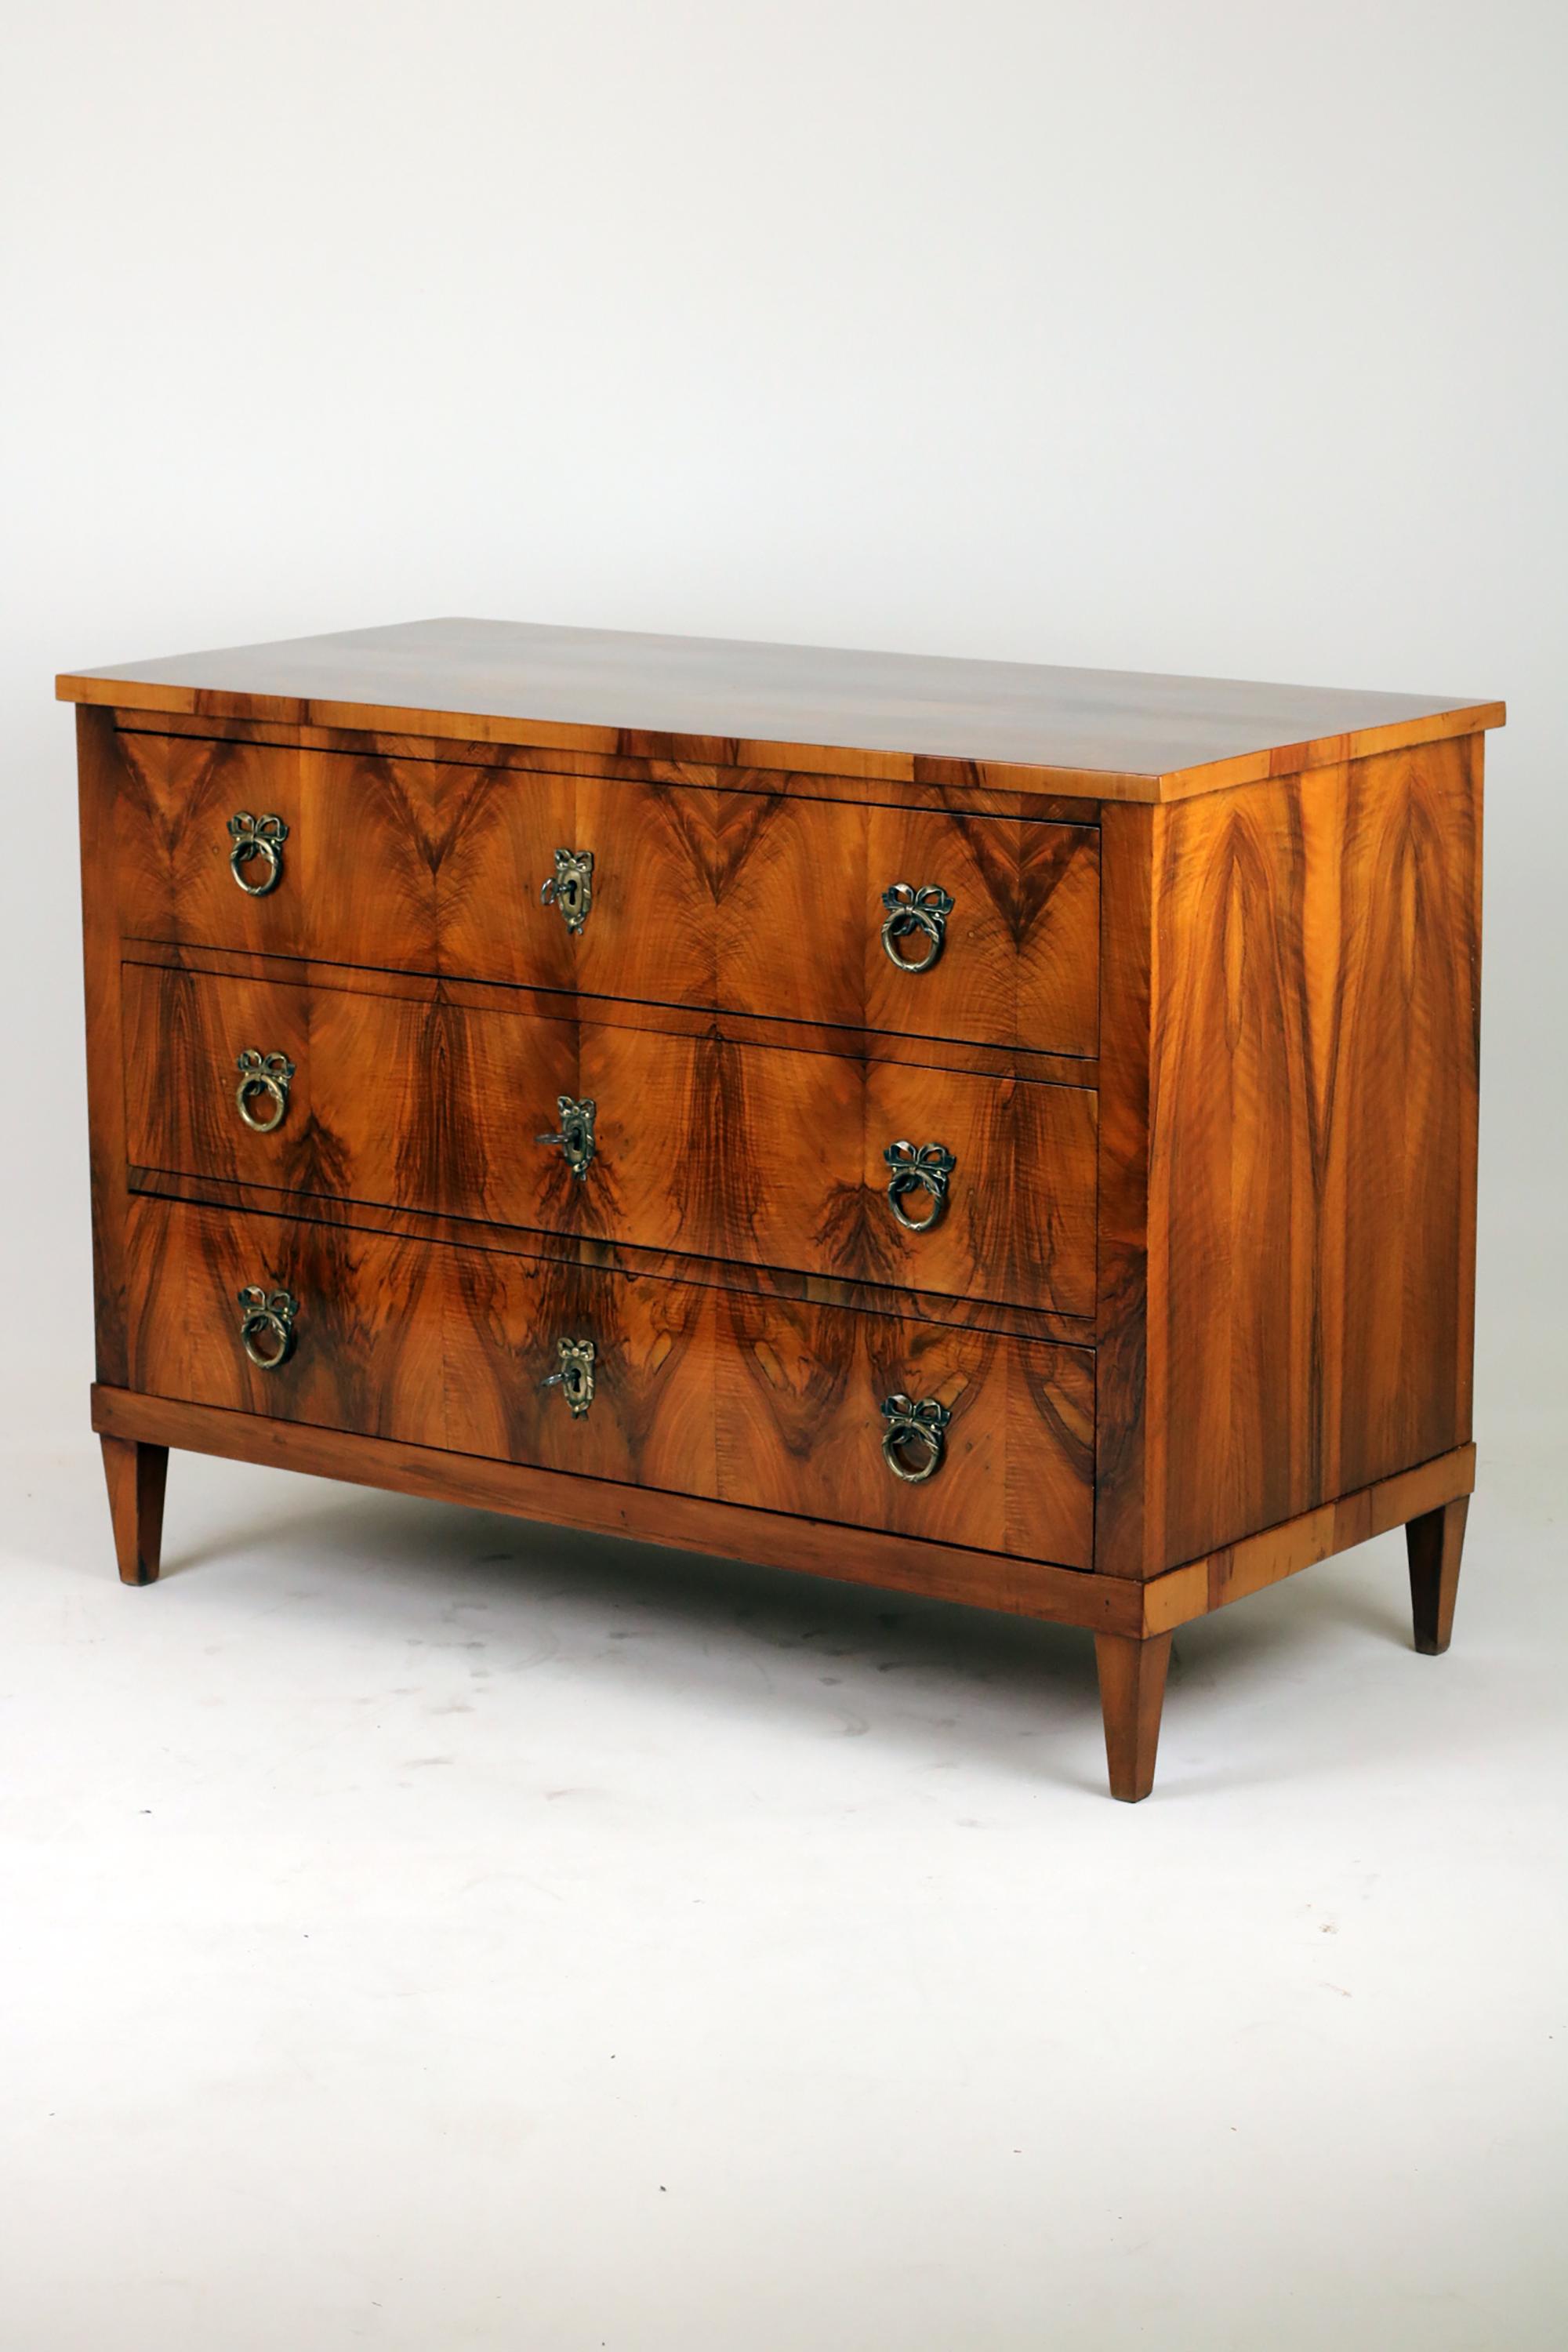 Early 19th Century Chest of drawer, 
Germany 1820, of the Biedermeier period

Very impressive Biedermeier Chest of drawers, standing on conical feet with beautifully walnut veneer.  The top plate mirrored, pyramid-shaped veneer. Three large drawers